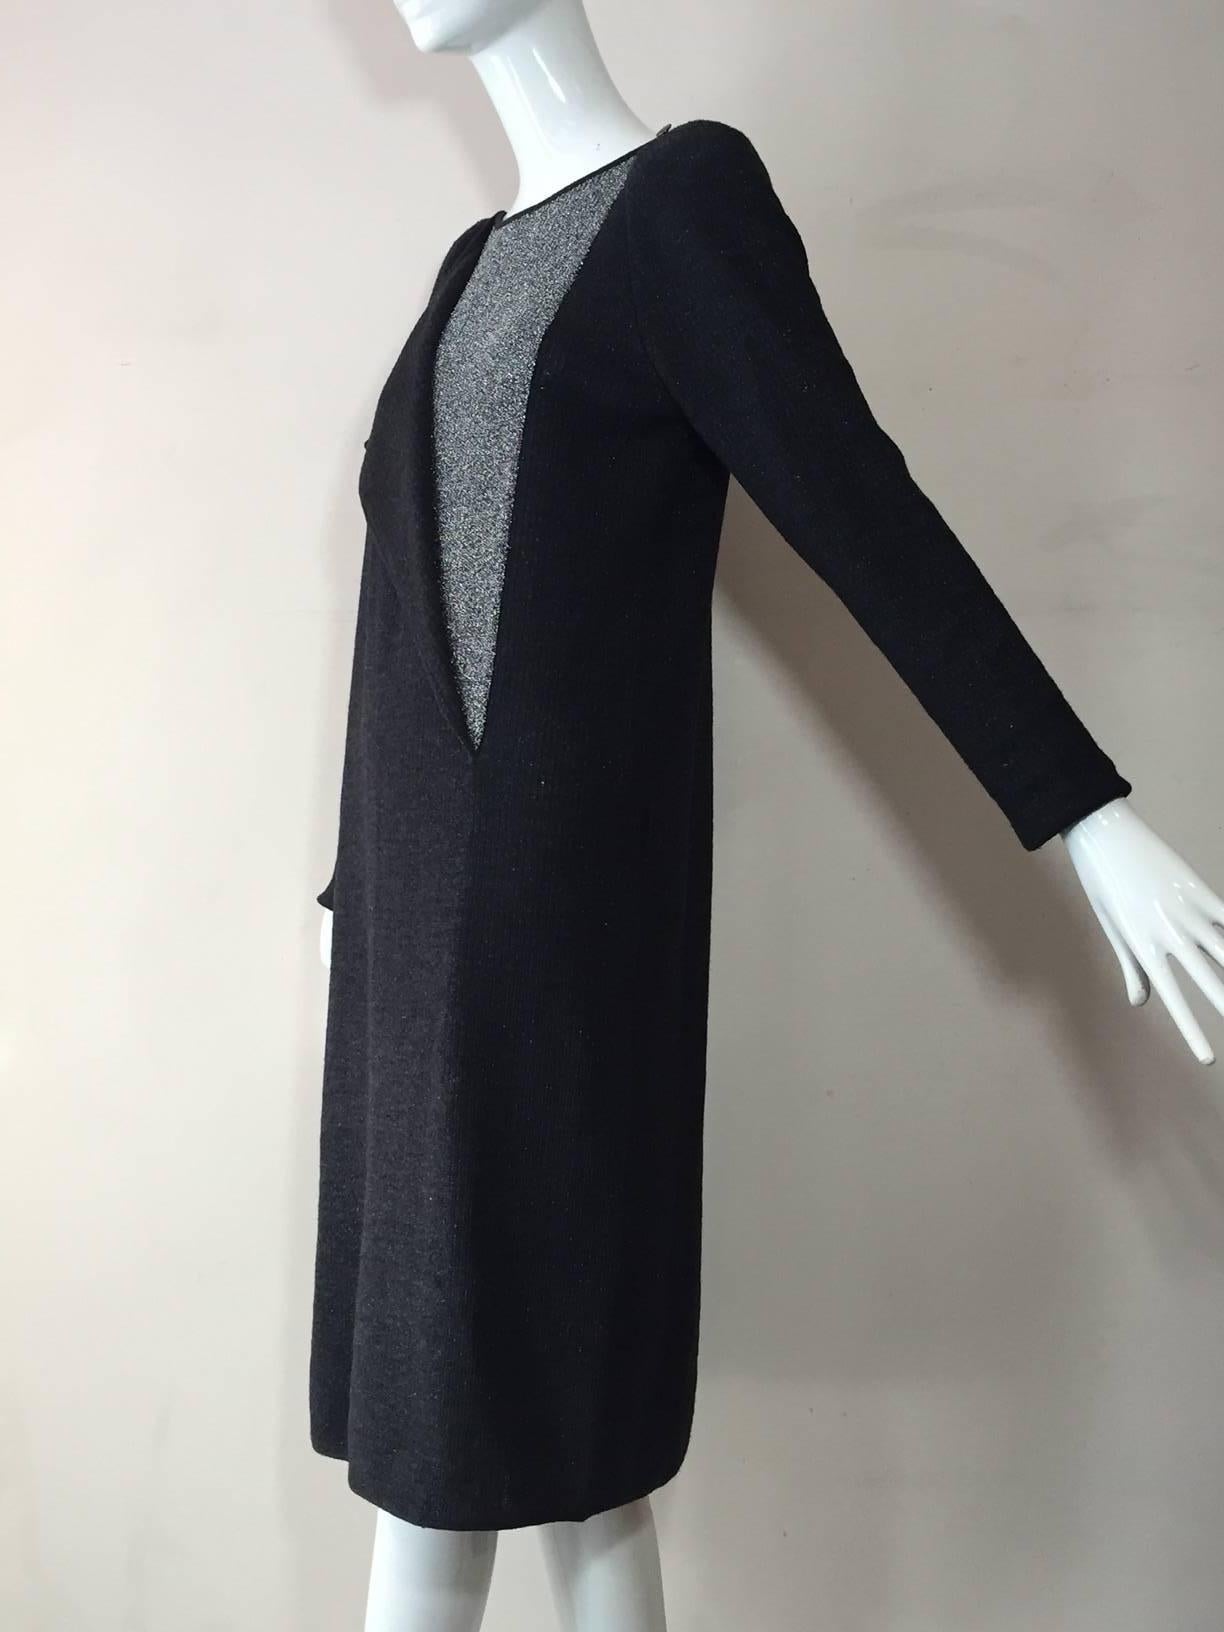 A 1980s Karl Lagerfeld for Chloe gray wool and lurex knit dress:  long sleeves, padded shoulders.  Front panel unbuttons to reveal silver lurex panel. Side slit is backed with lurex for peek-a-boo effect. 